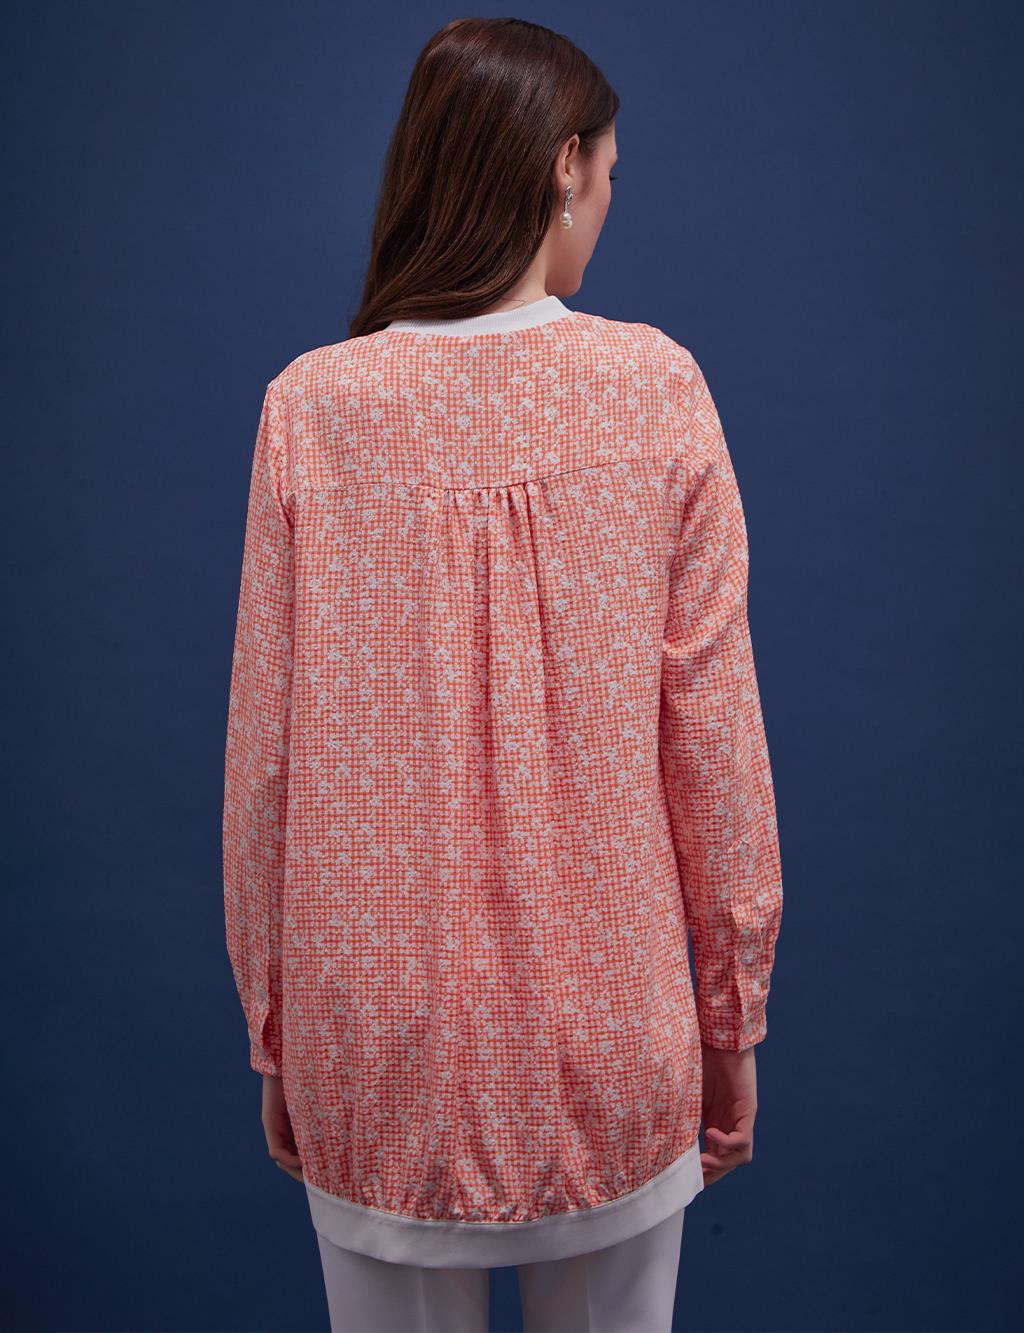 Floral Pattern Checkered Shirt Coral